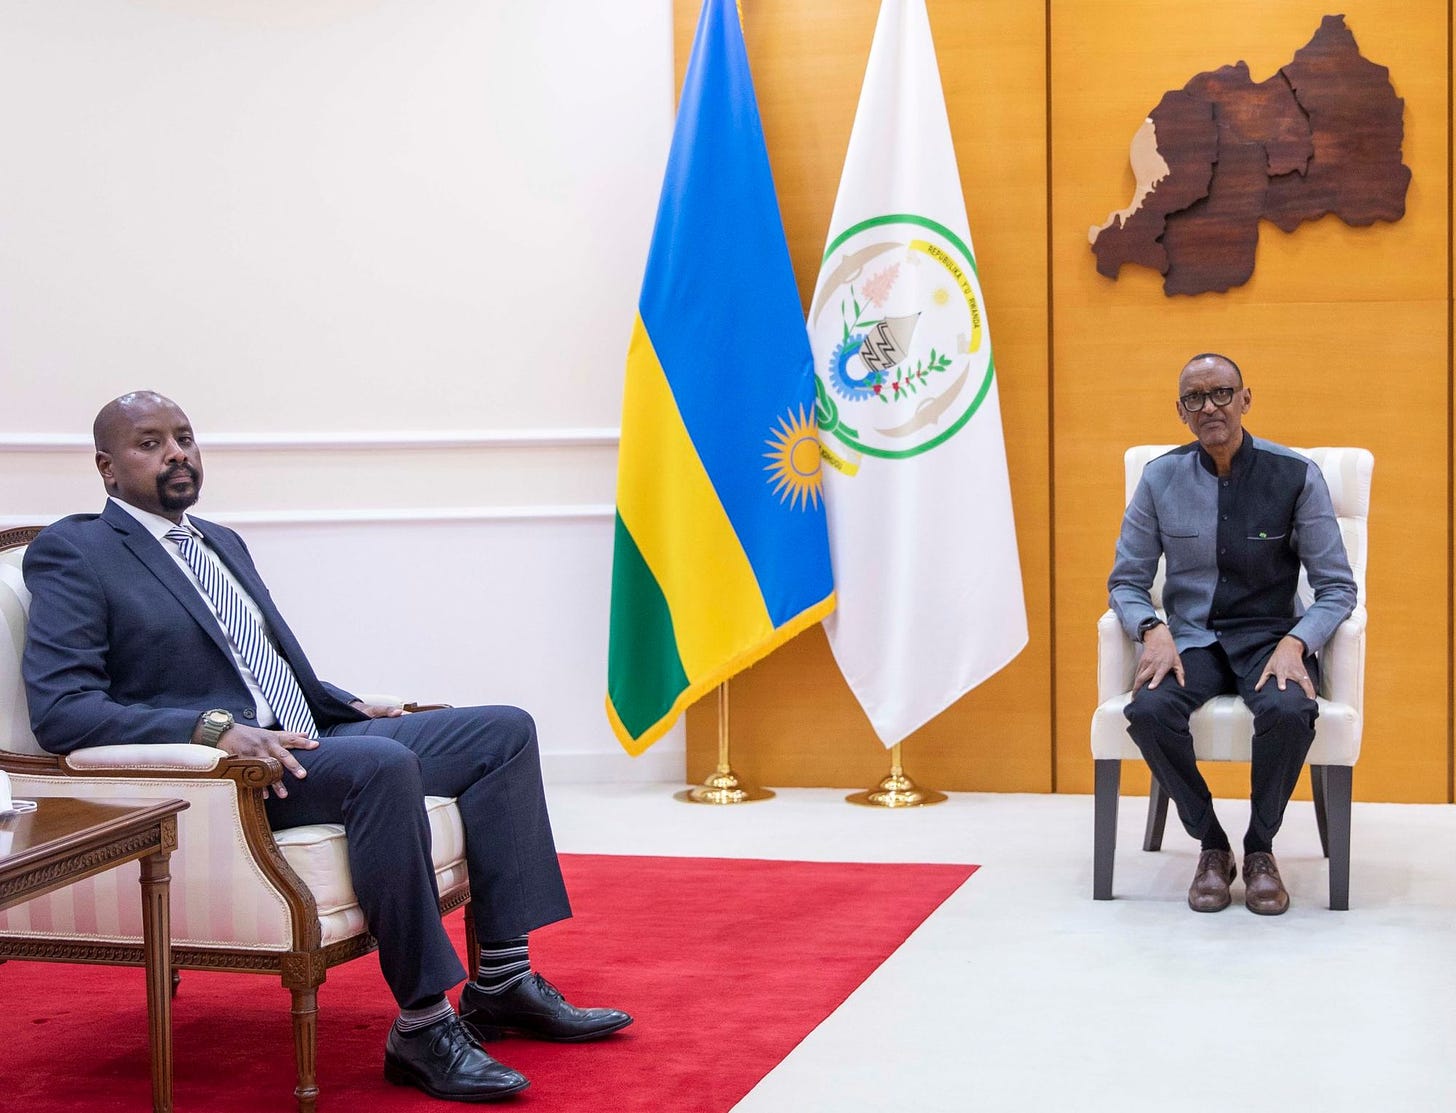 Uganda's First Son Gen Muhoozi's diplomatic charm offensive towards Rwanda: Kigali says "there is still need to pay attention to underlying unresolved issues"